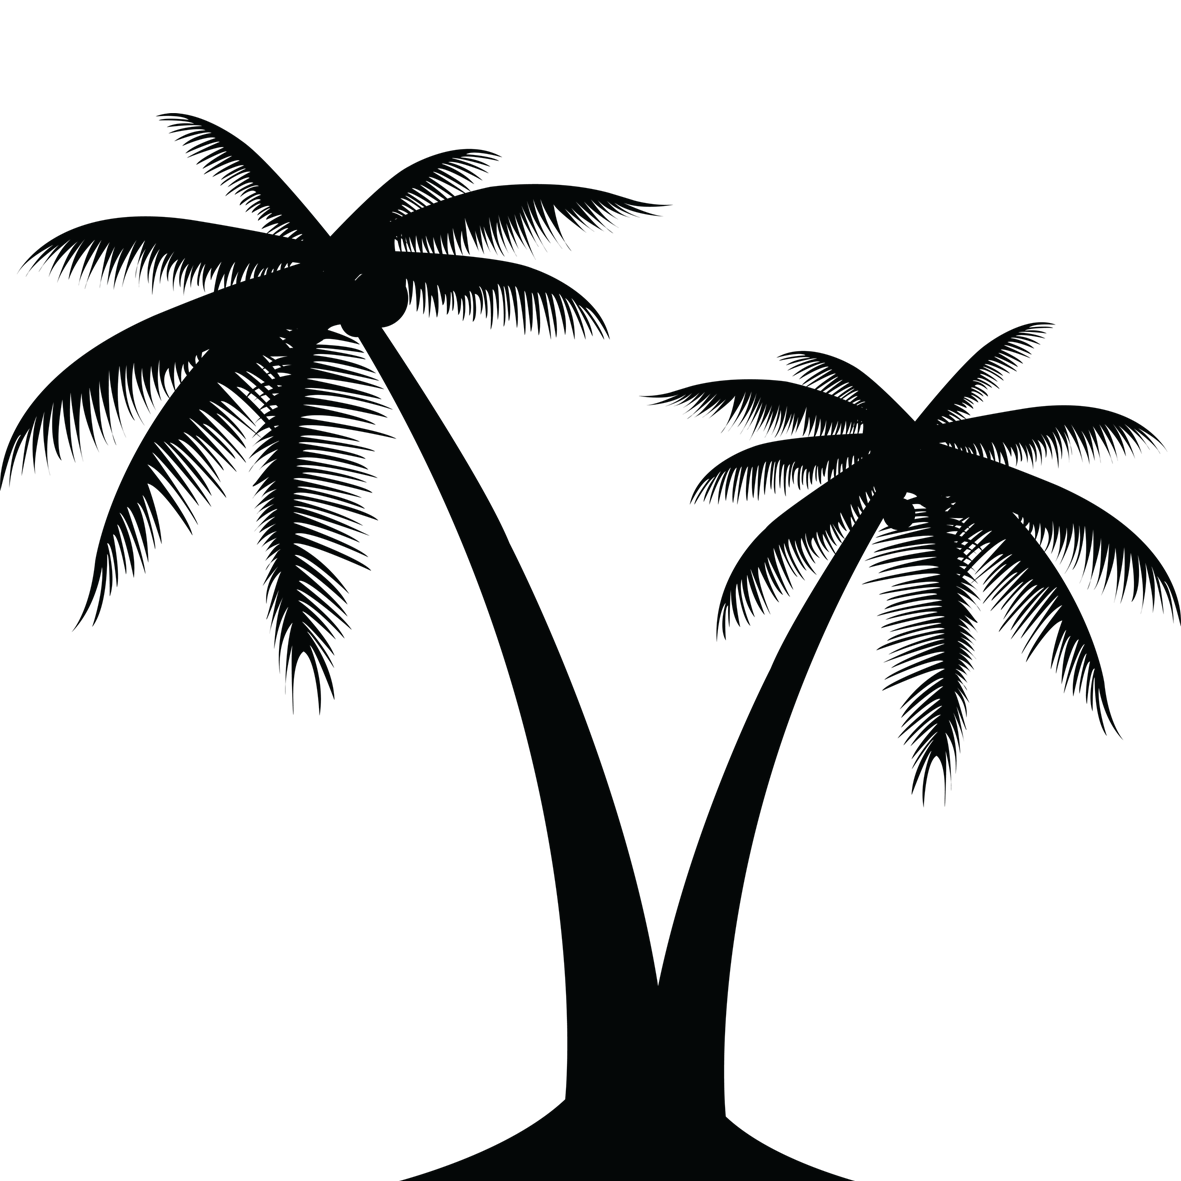 Tree silhouette at getdrawings. Palm clipart simple